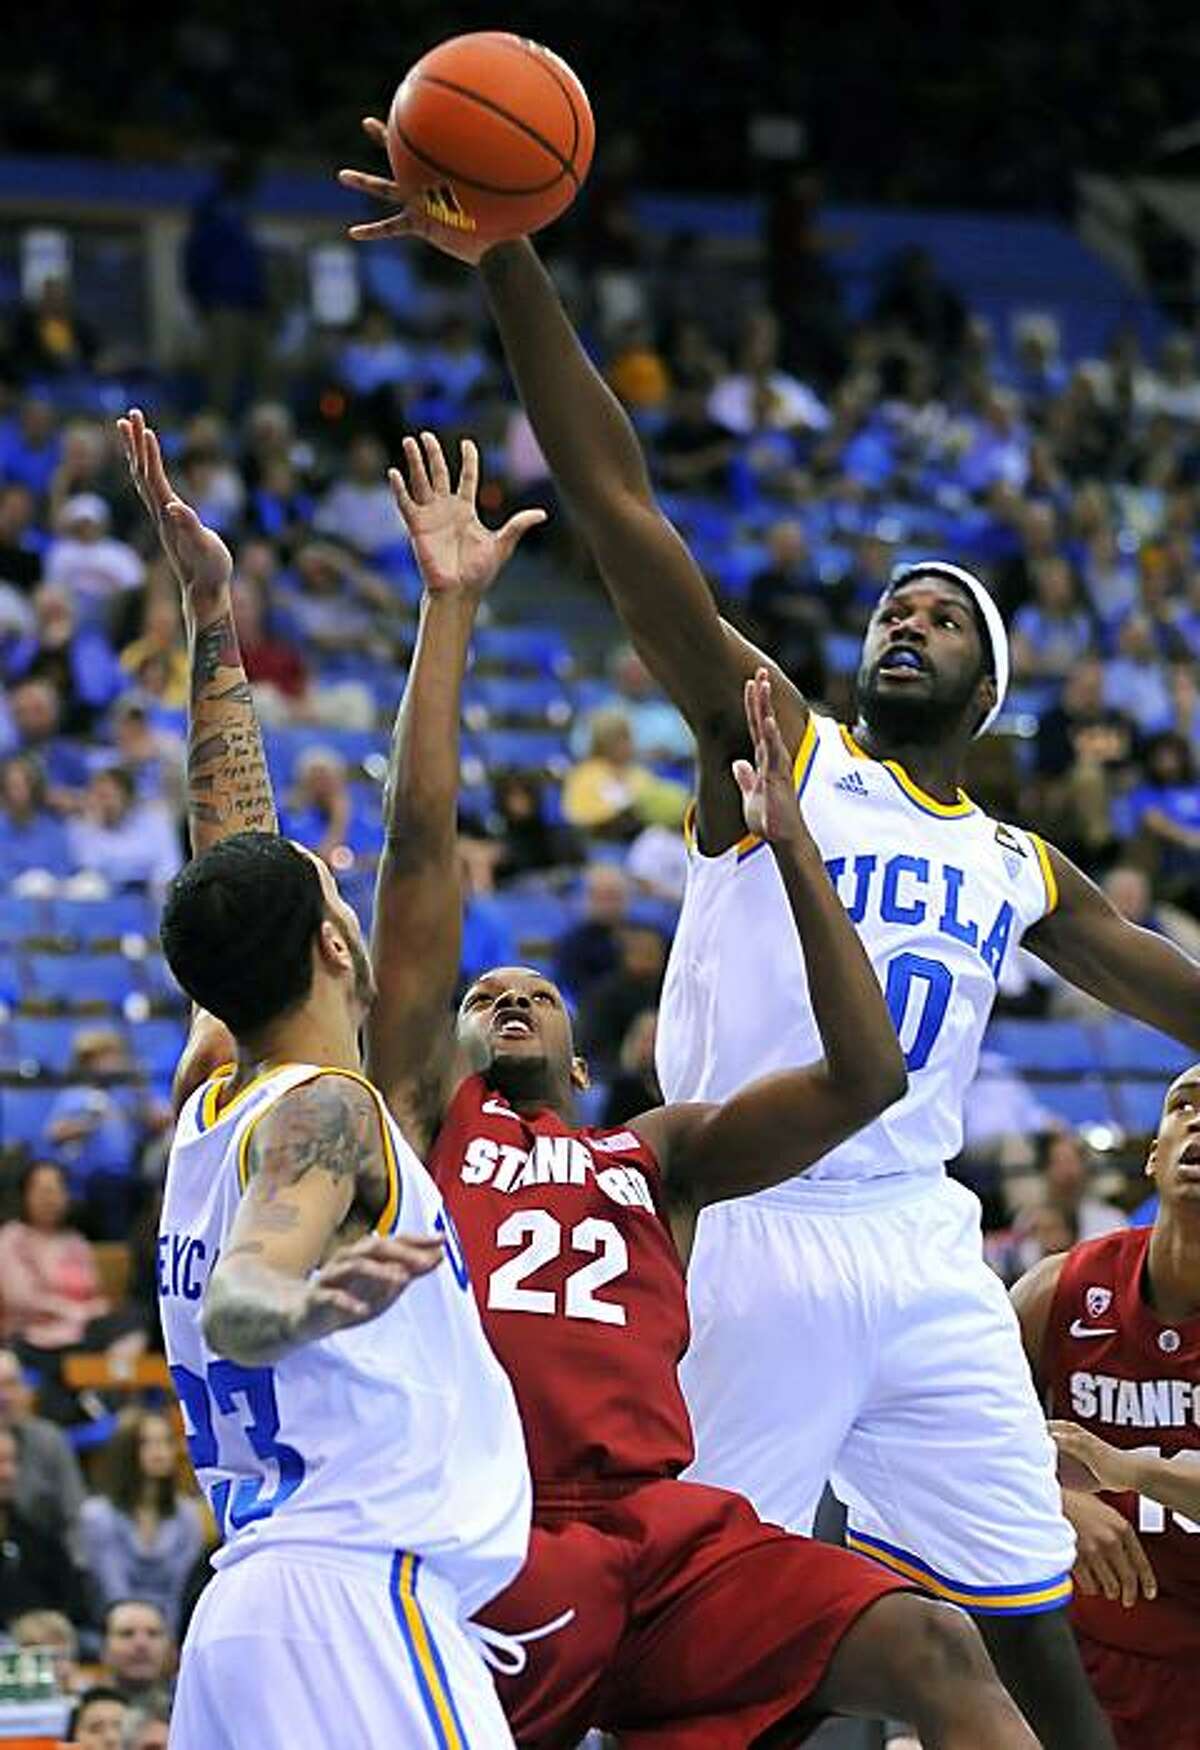 Stanford's Jarrett Mann (22) has his shot blocked as he tries to shoot between UCLA's Anthony Stover, right, and Tyler Honeycutt in the first half of an NCAA college basketball game, Saturday, Jan. 22, 2011, in Los Angeles.